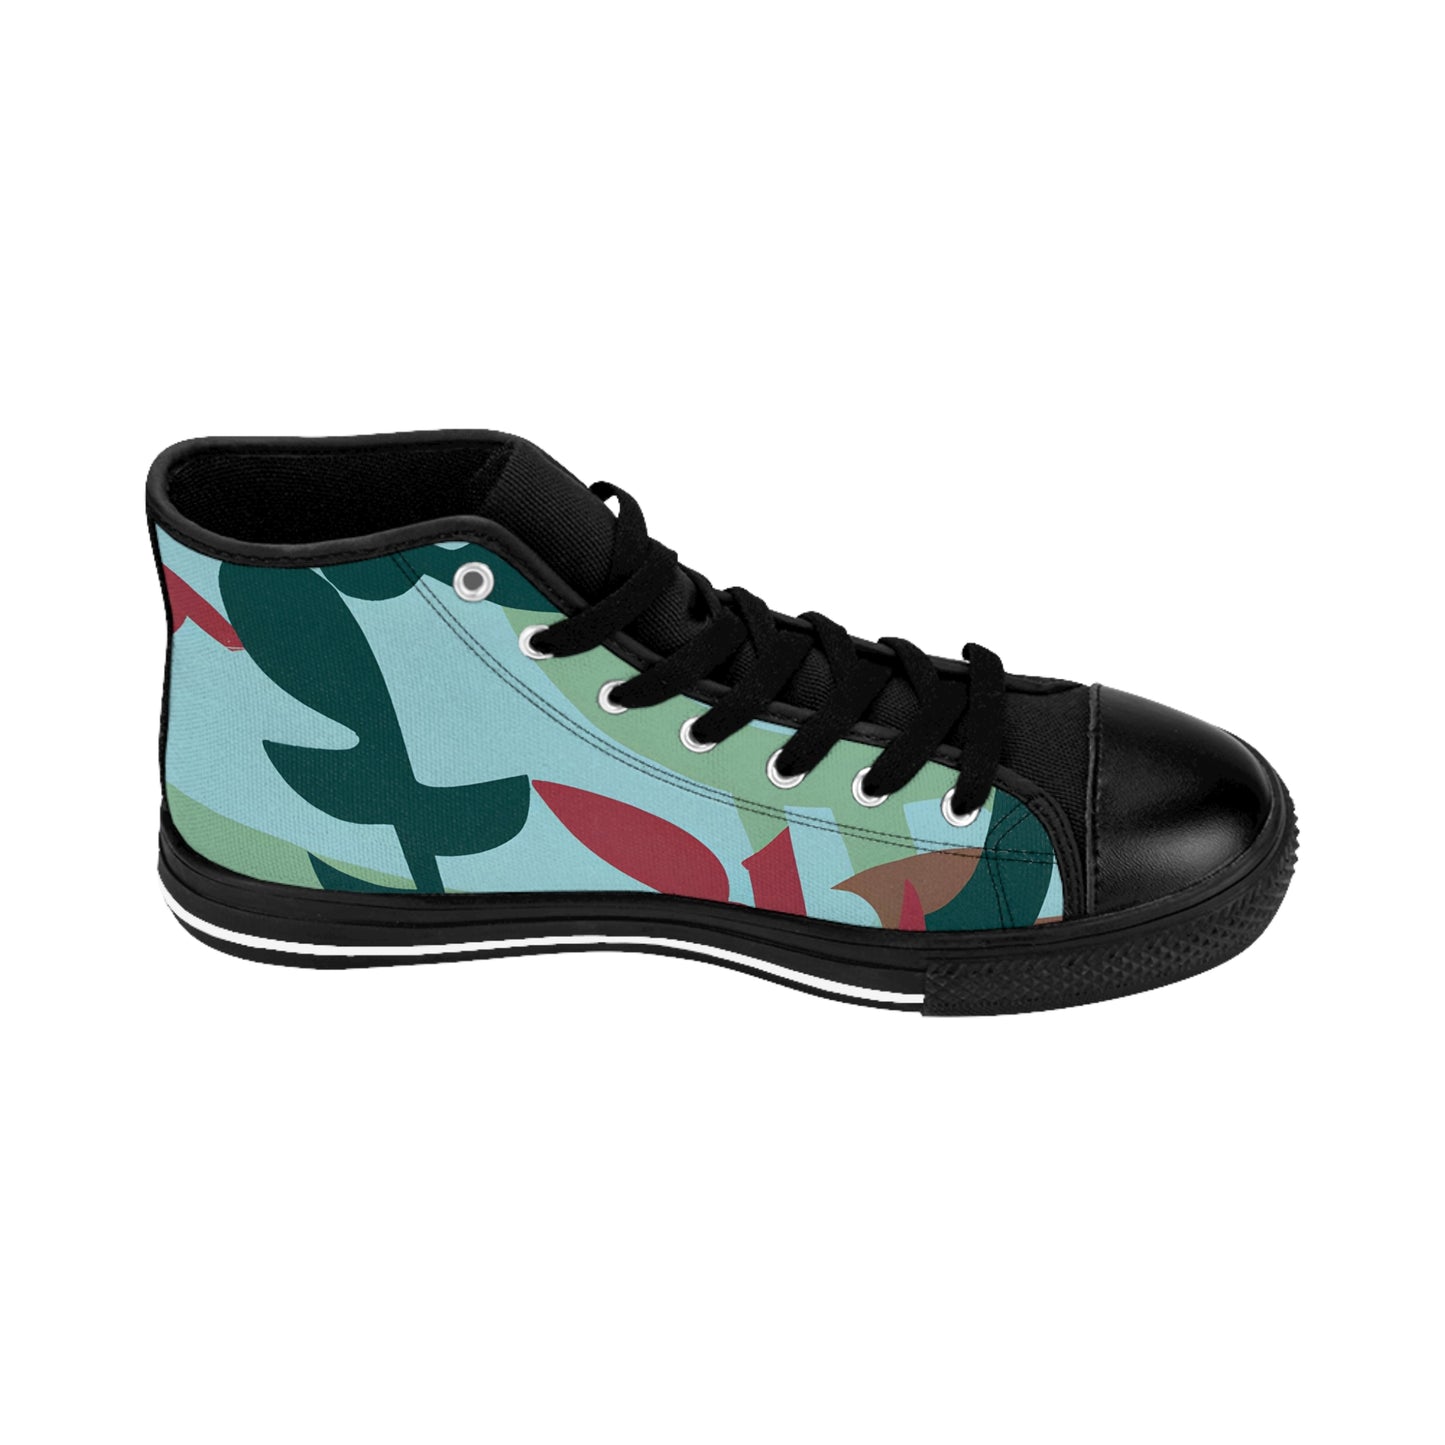 Chaparral Ione - Women's Classic HIgh-Top Sneakers